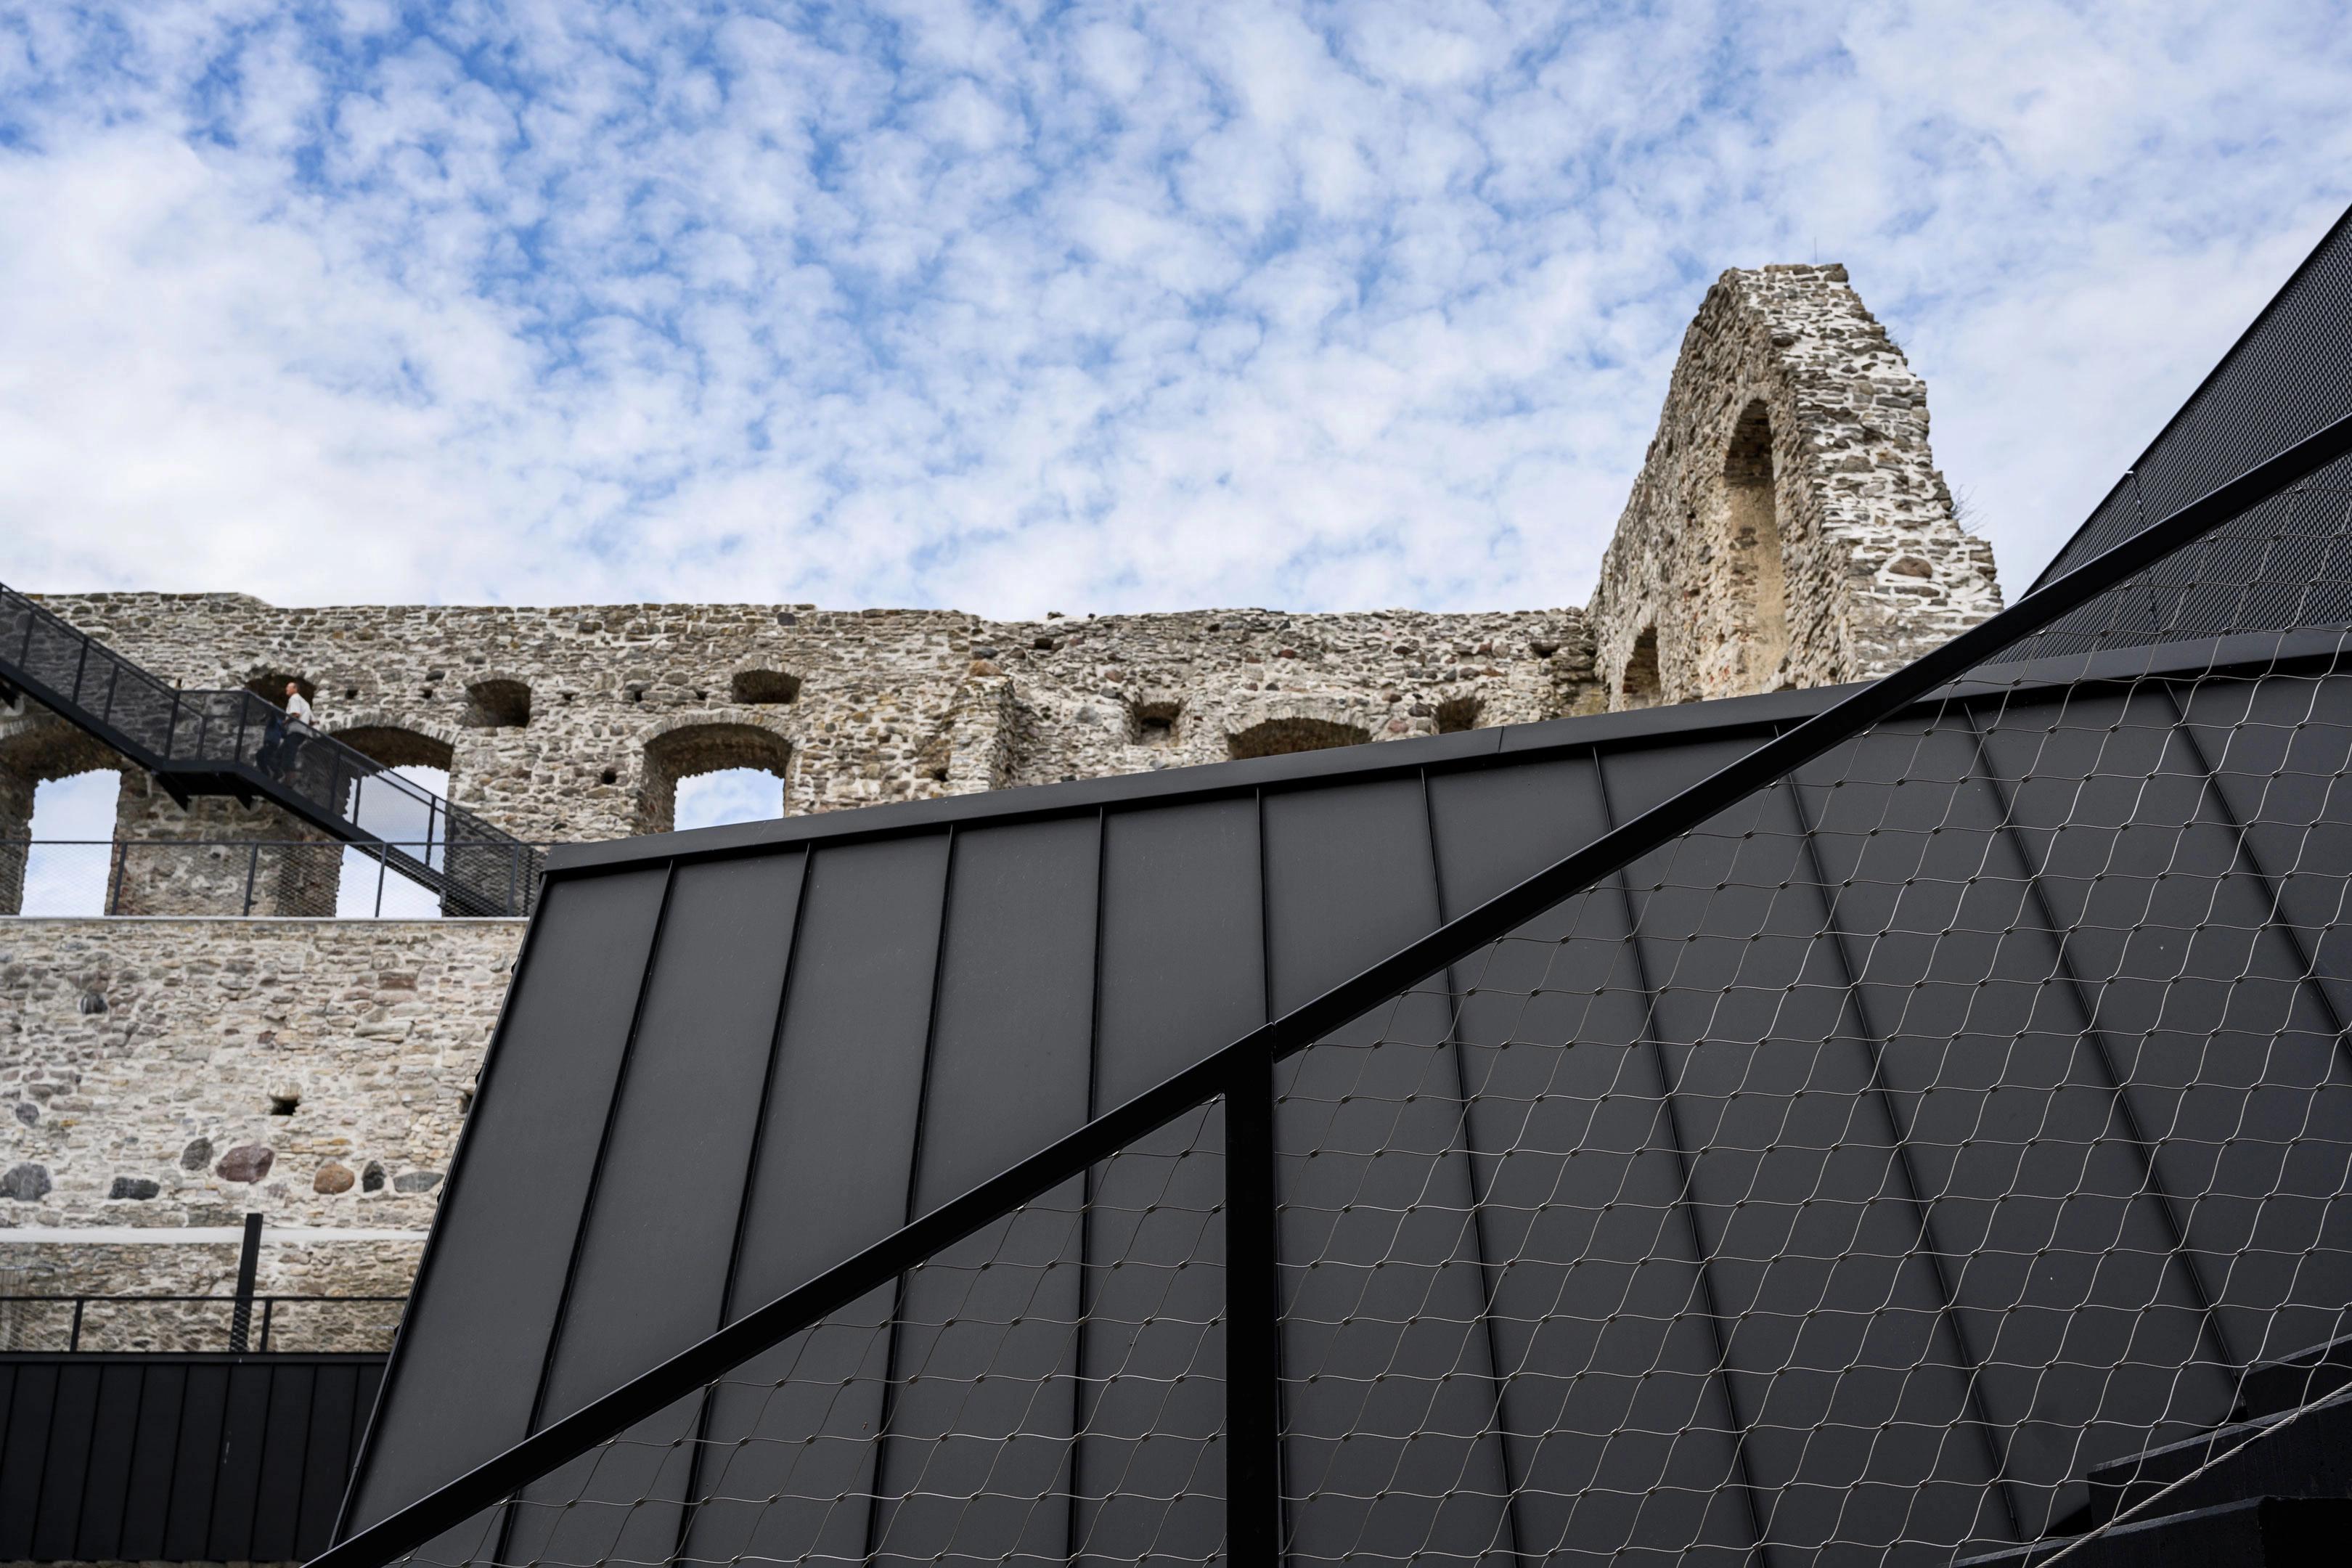 New black staircases on the walls of Haapsalu Castle